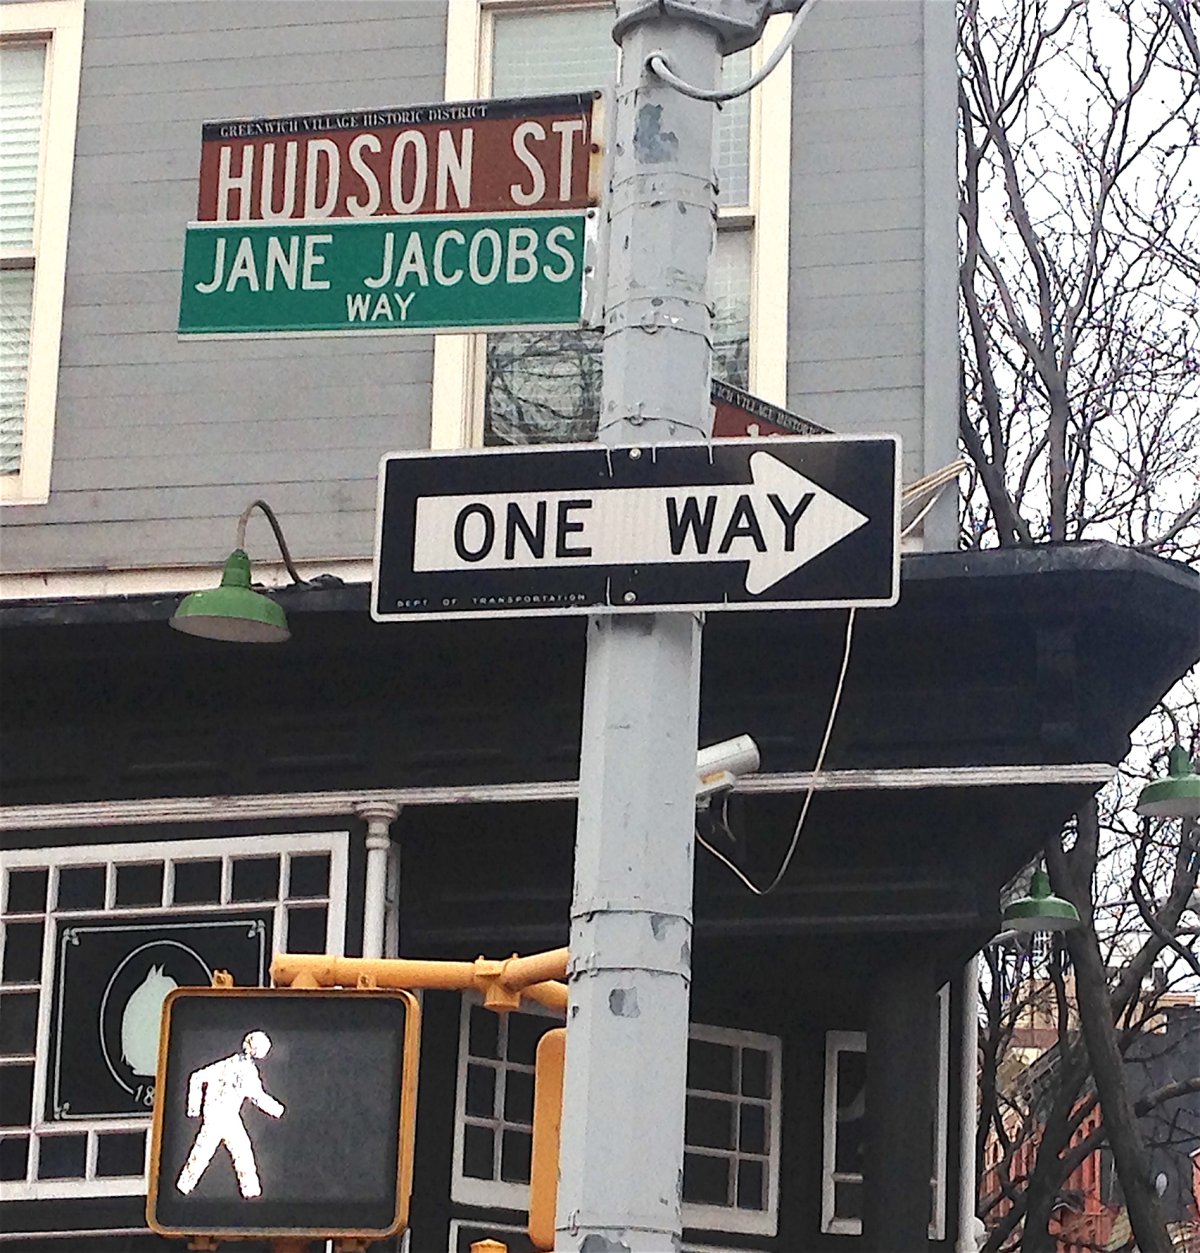 Given Jane Jacobs’ outsize role in preserving the Village, there is little in the way of tribute to her locally, save for this street co-naming sign outside the White Horse Tavern on the block where she lived. Photo by Sara Hendrickson